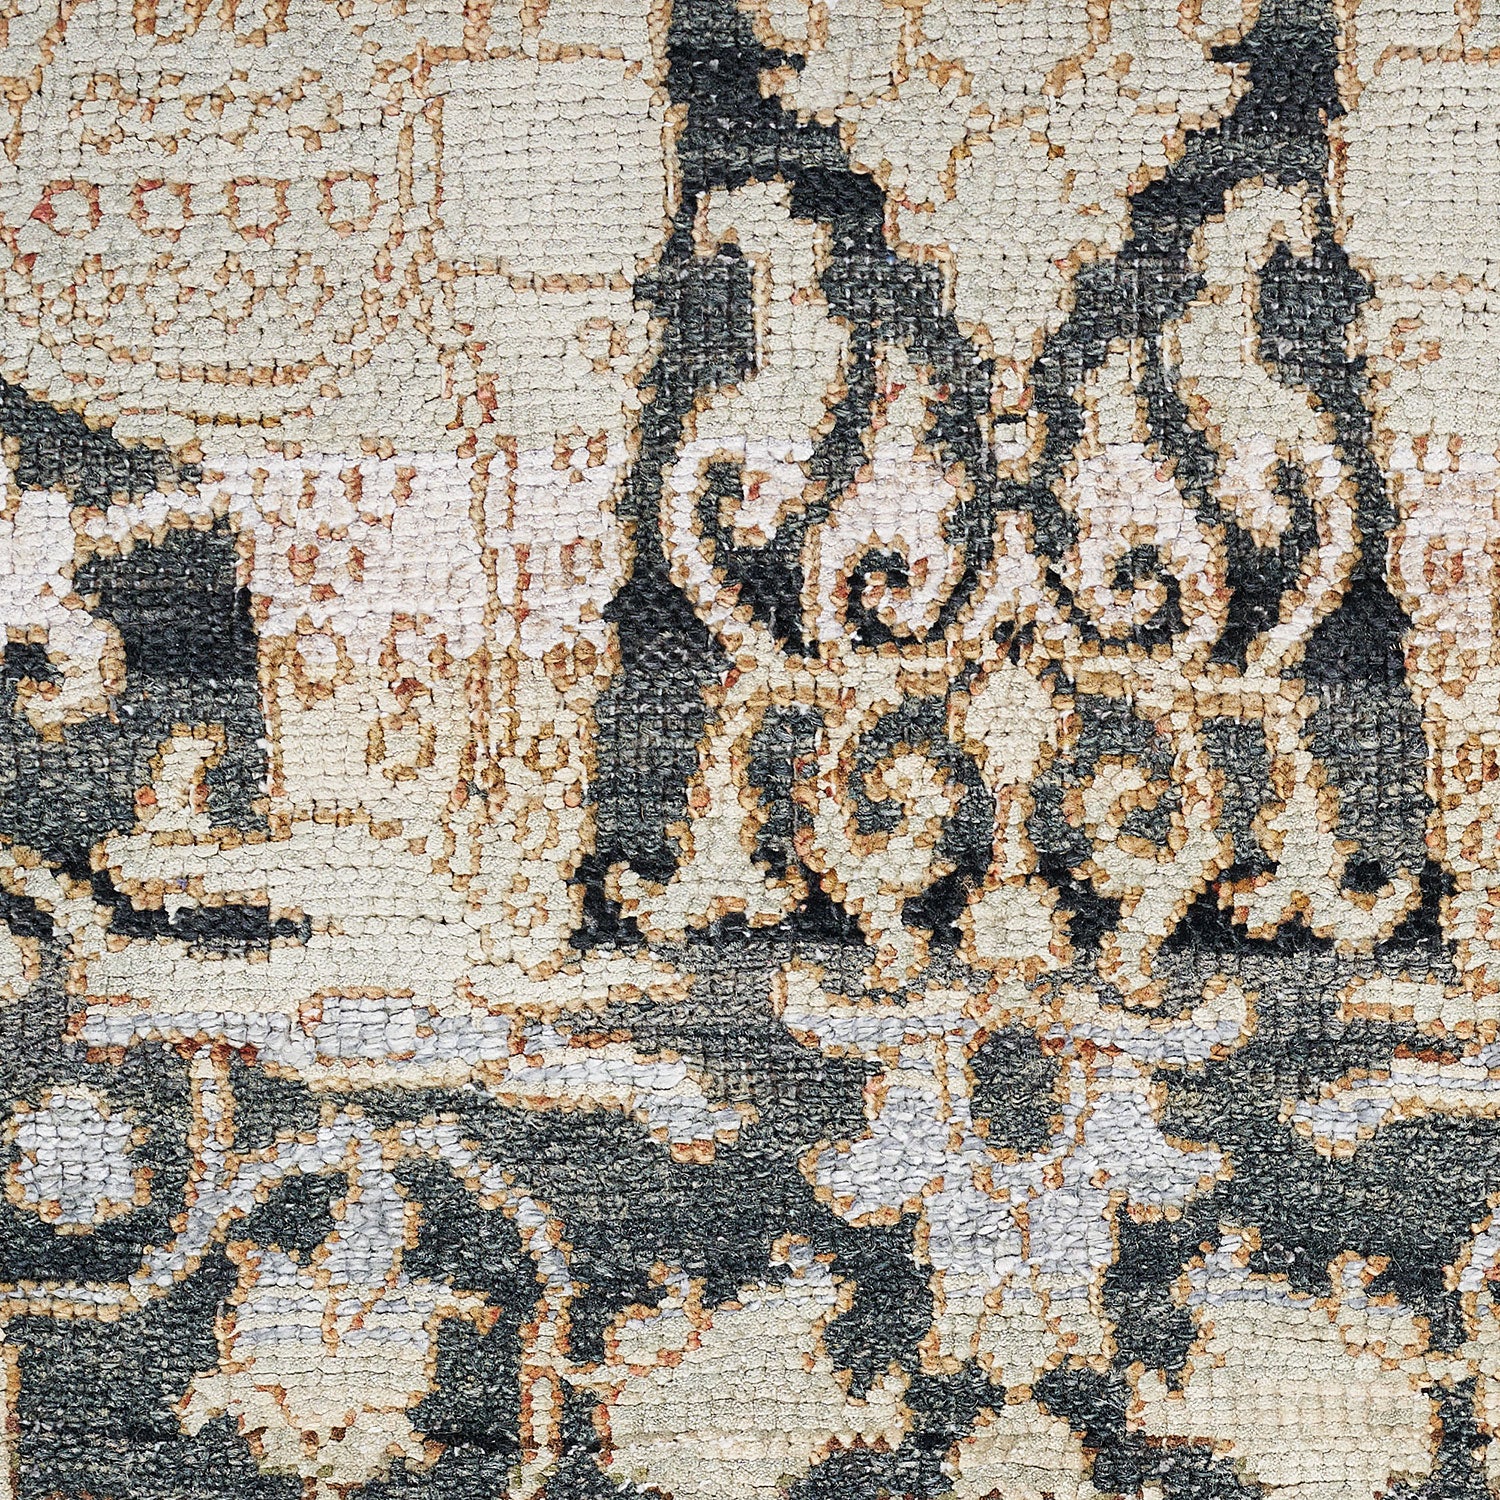 Close-up of an antique textile featuring ornate baroque design.